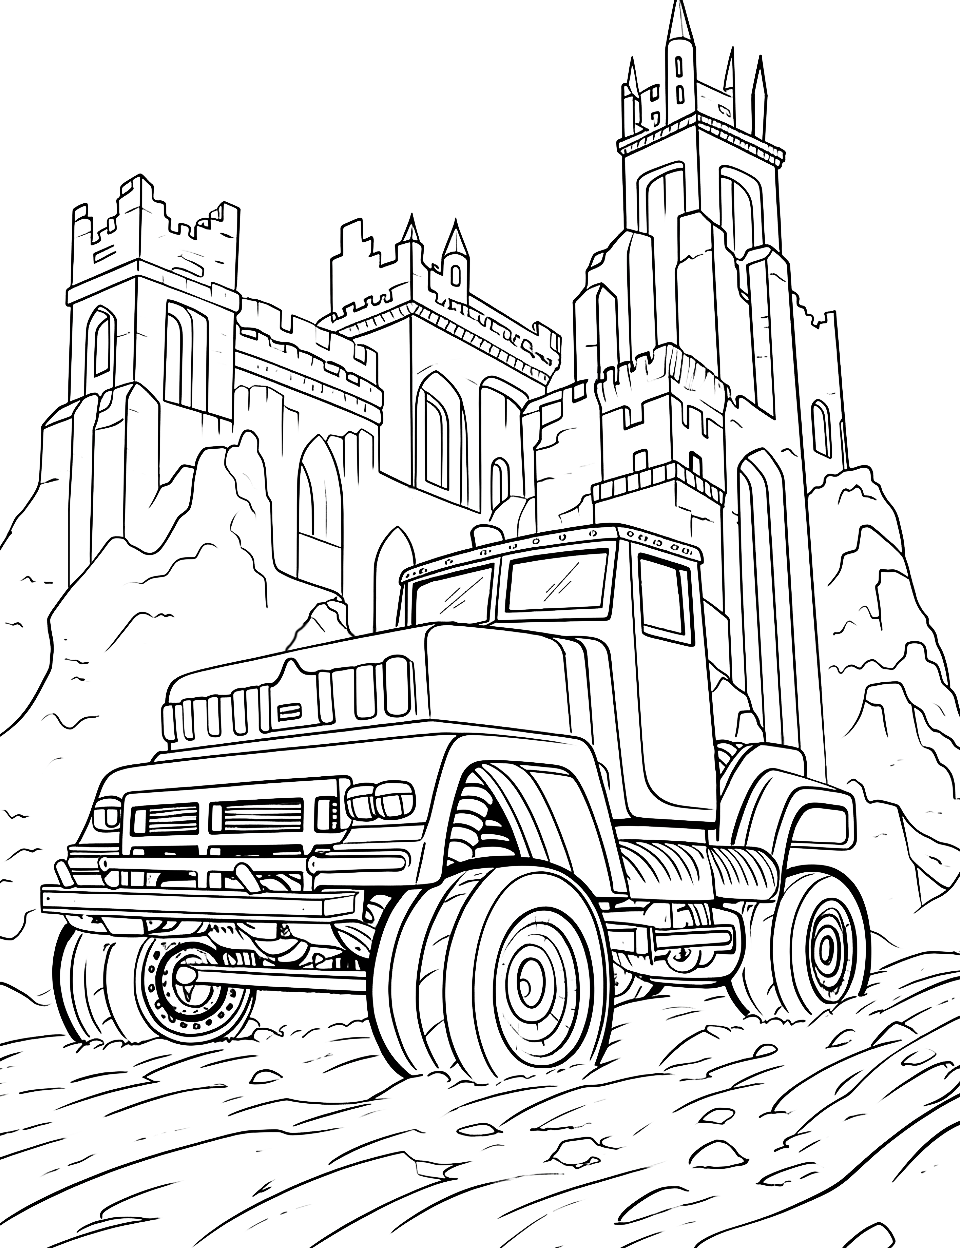 Knight's Castle  Monster Truck Coloring Page - A medieval-themed monster truck in front of a castle.